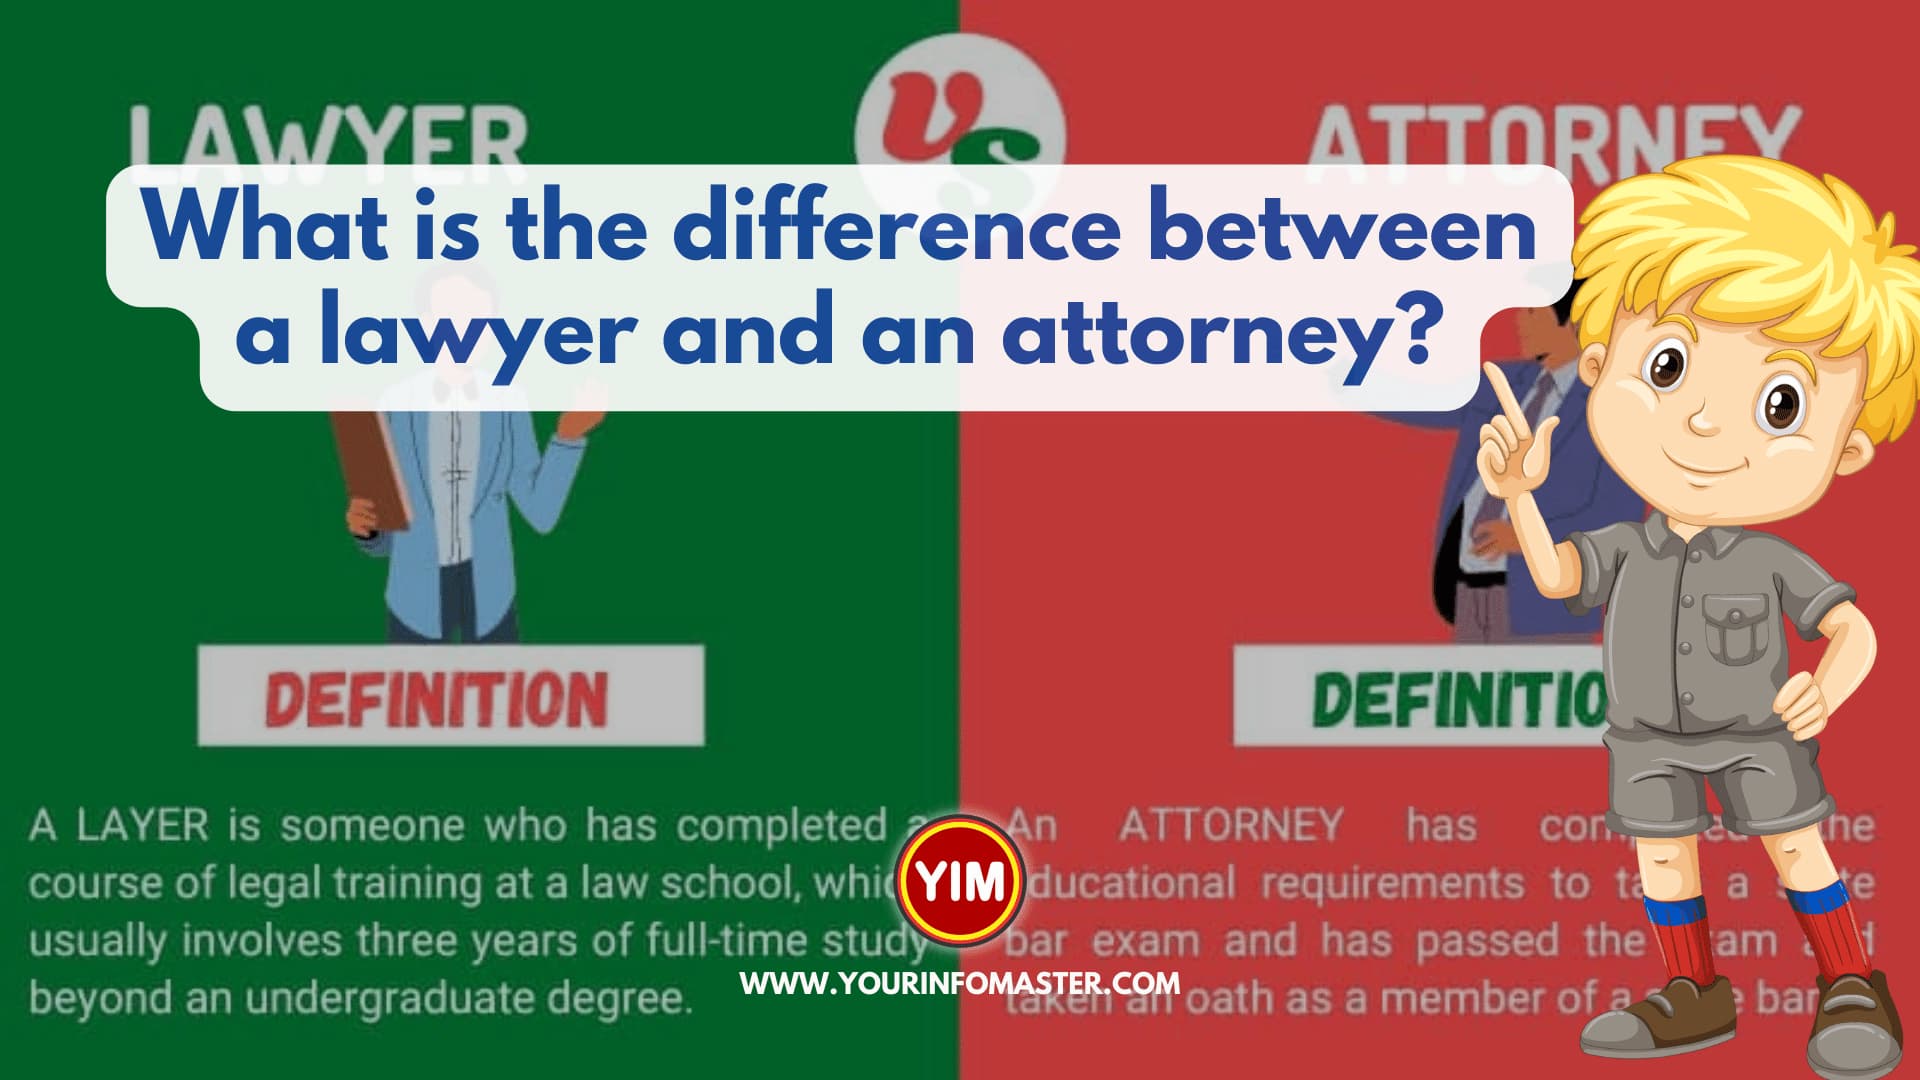 What is the difference between a lawyer and an attorney